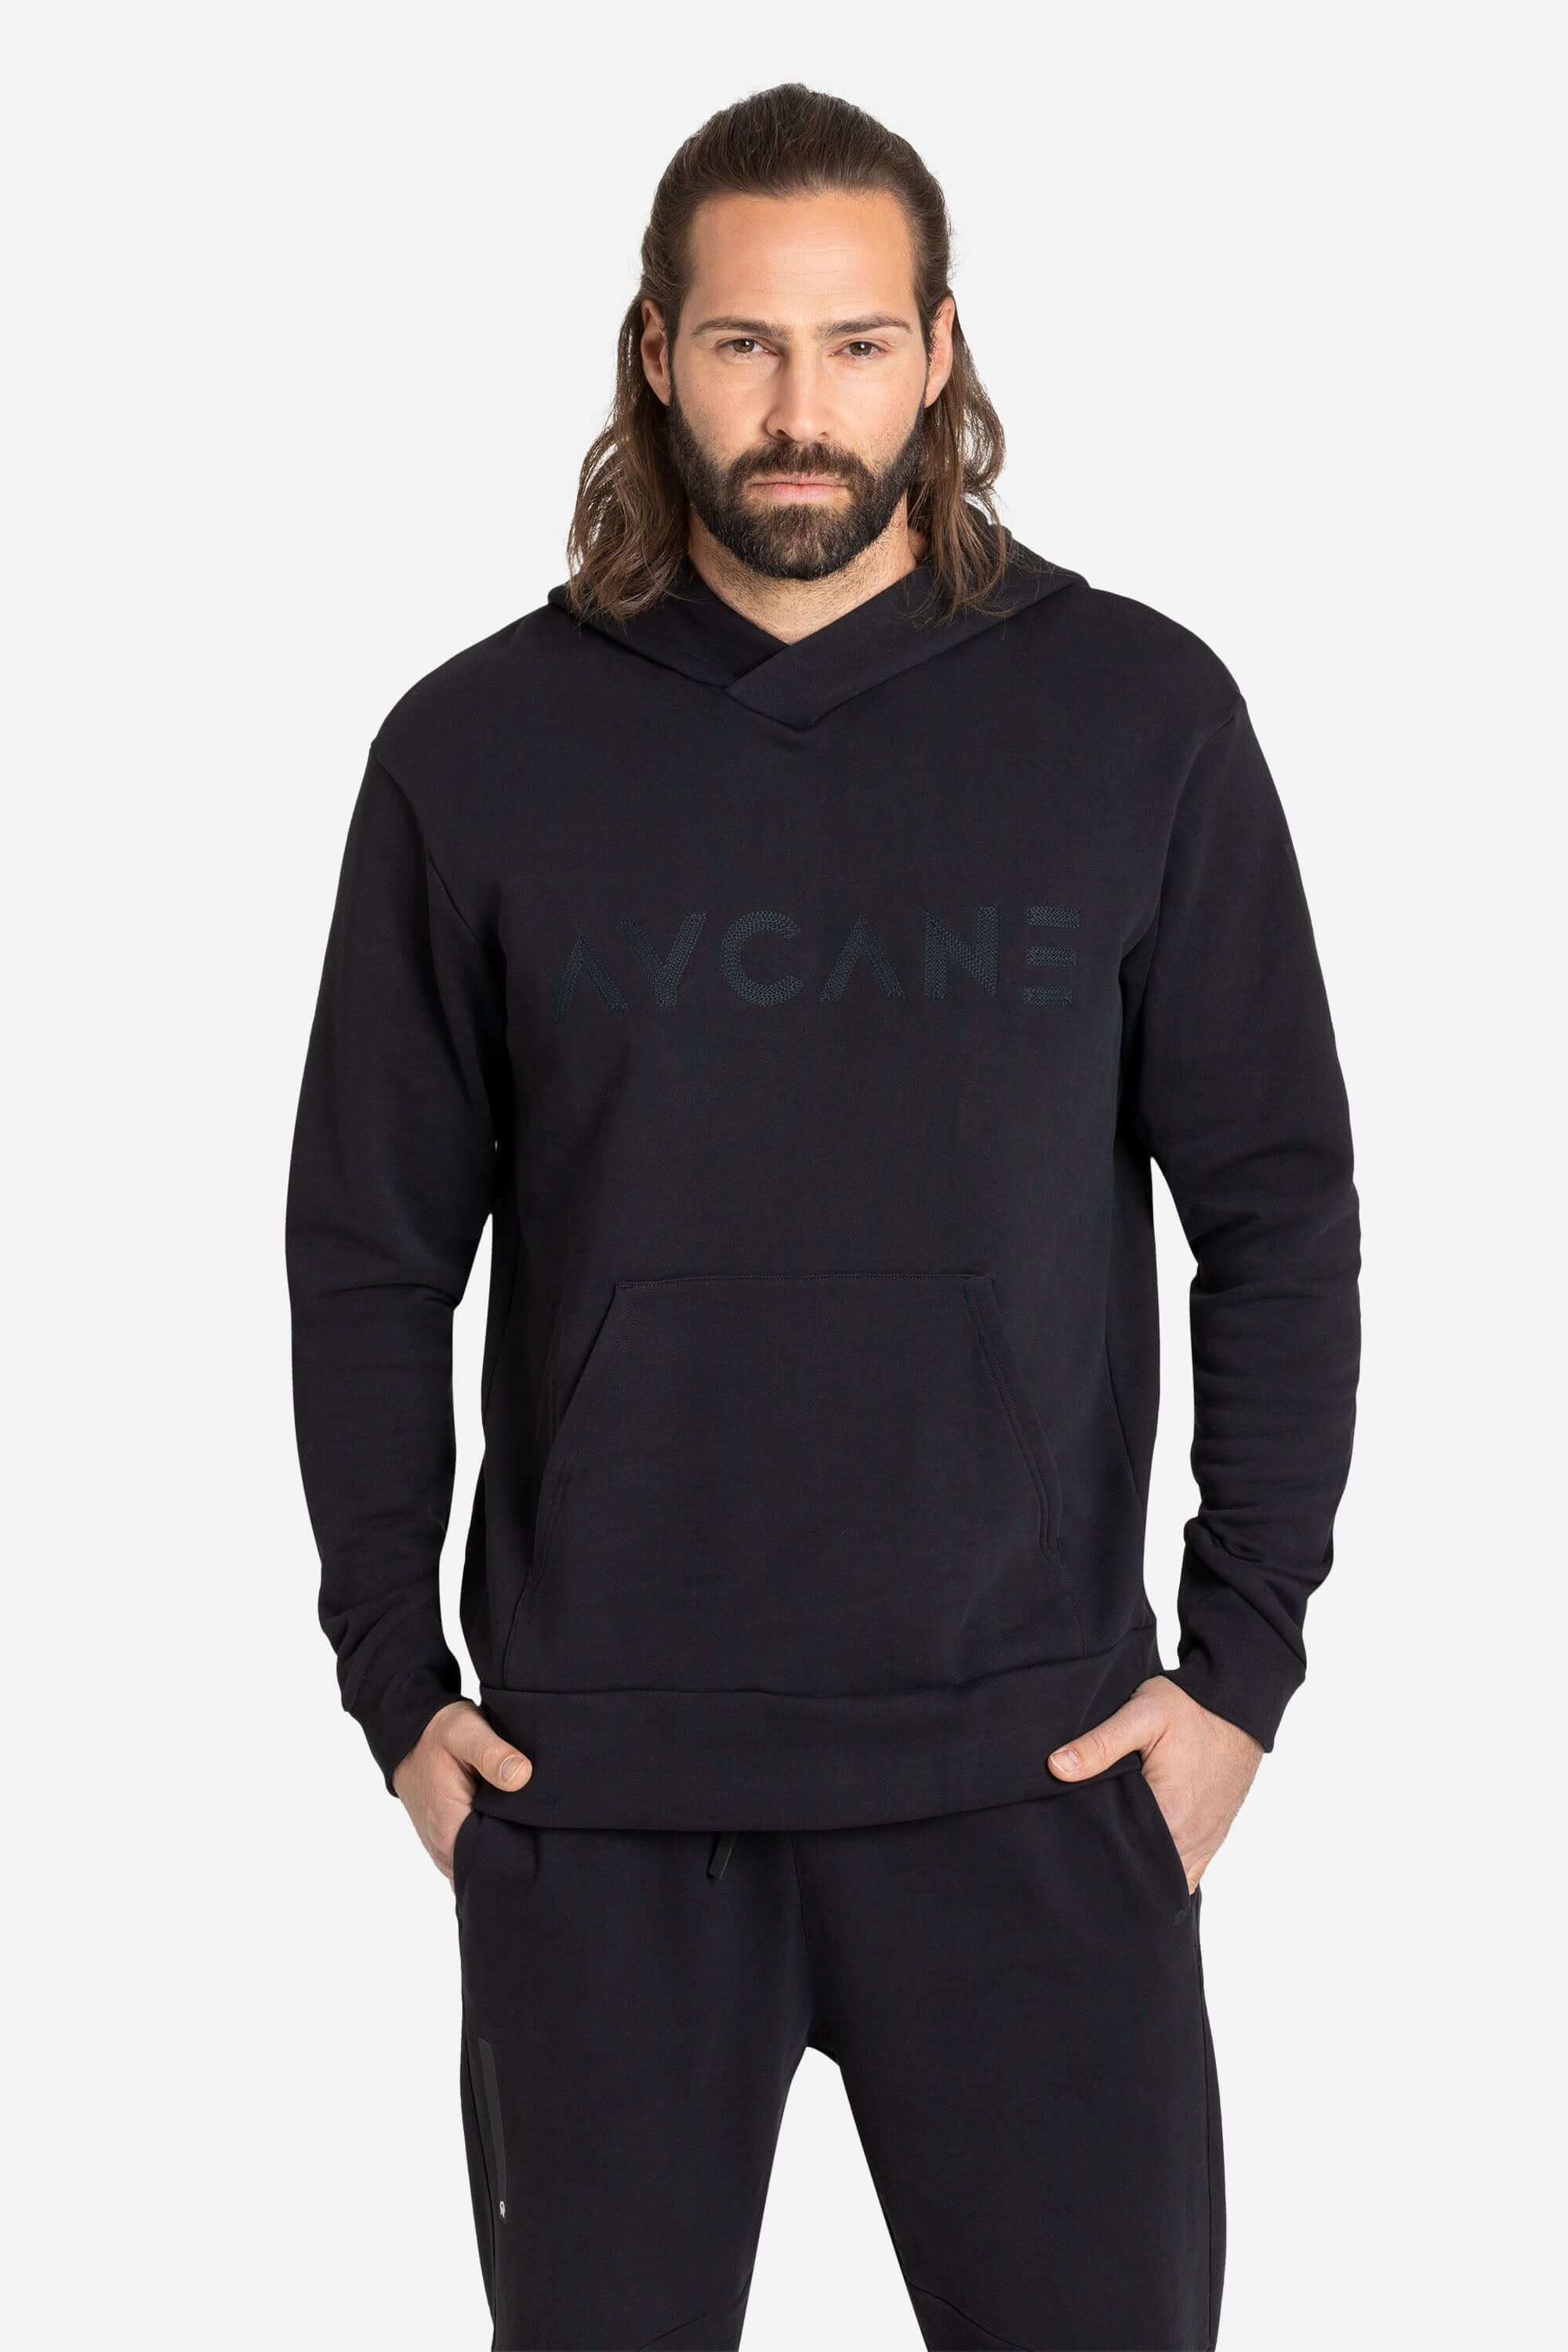 Black training and leisure hoodie with AYCANE logo in black